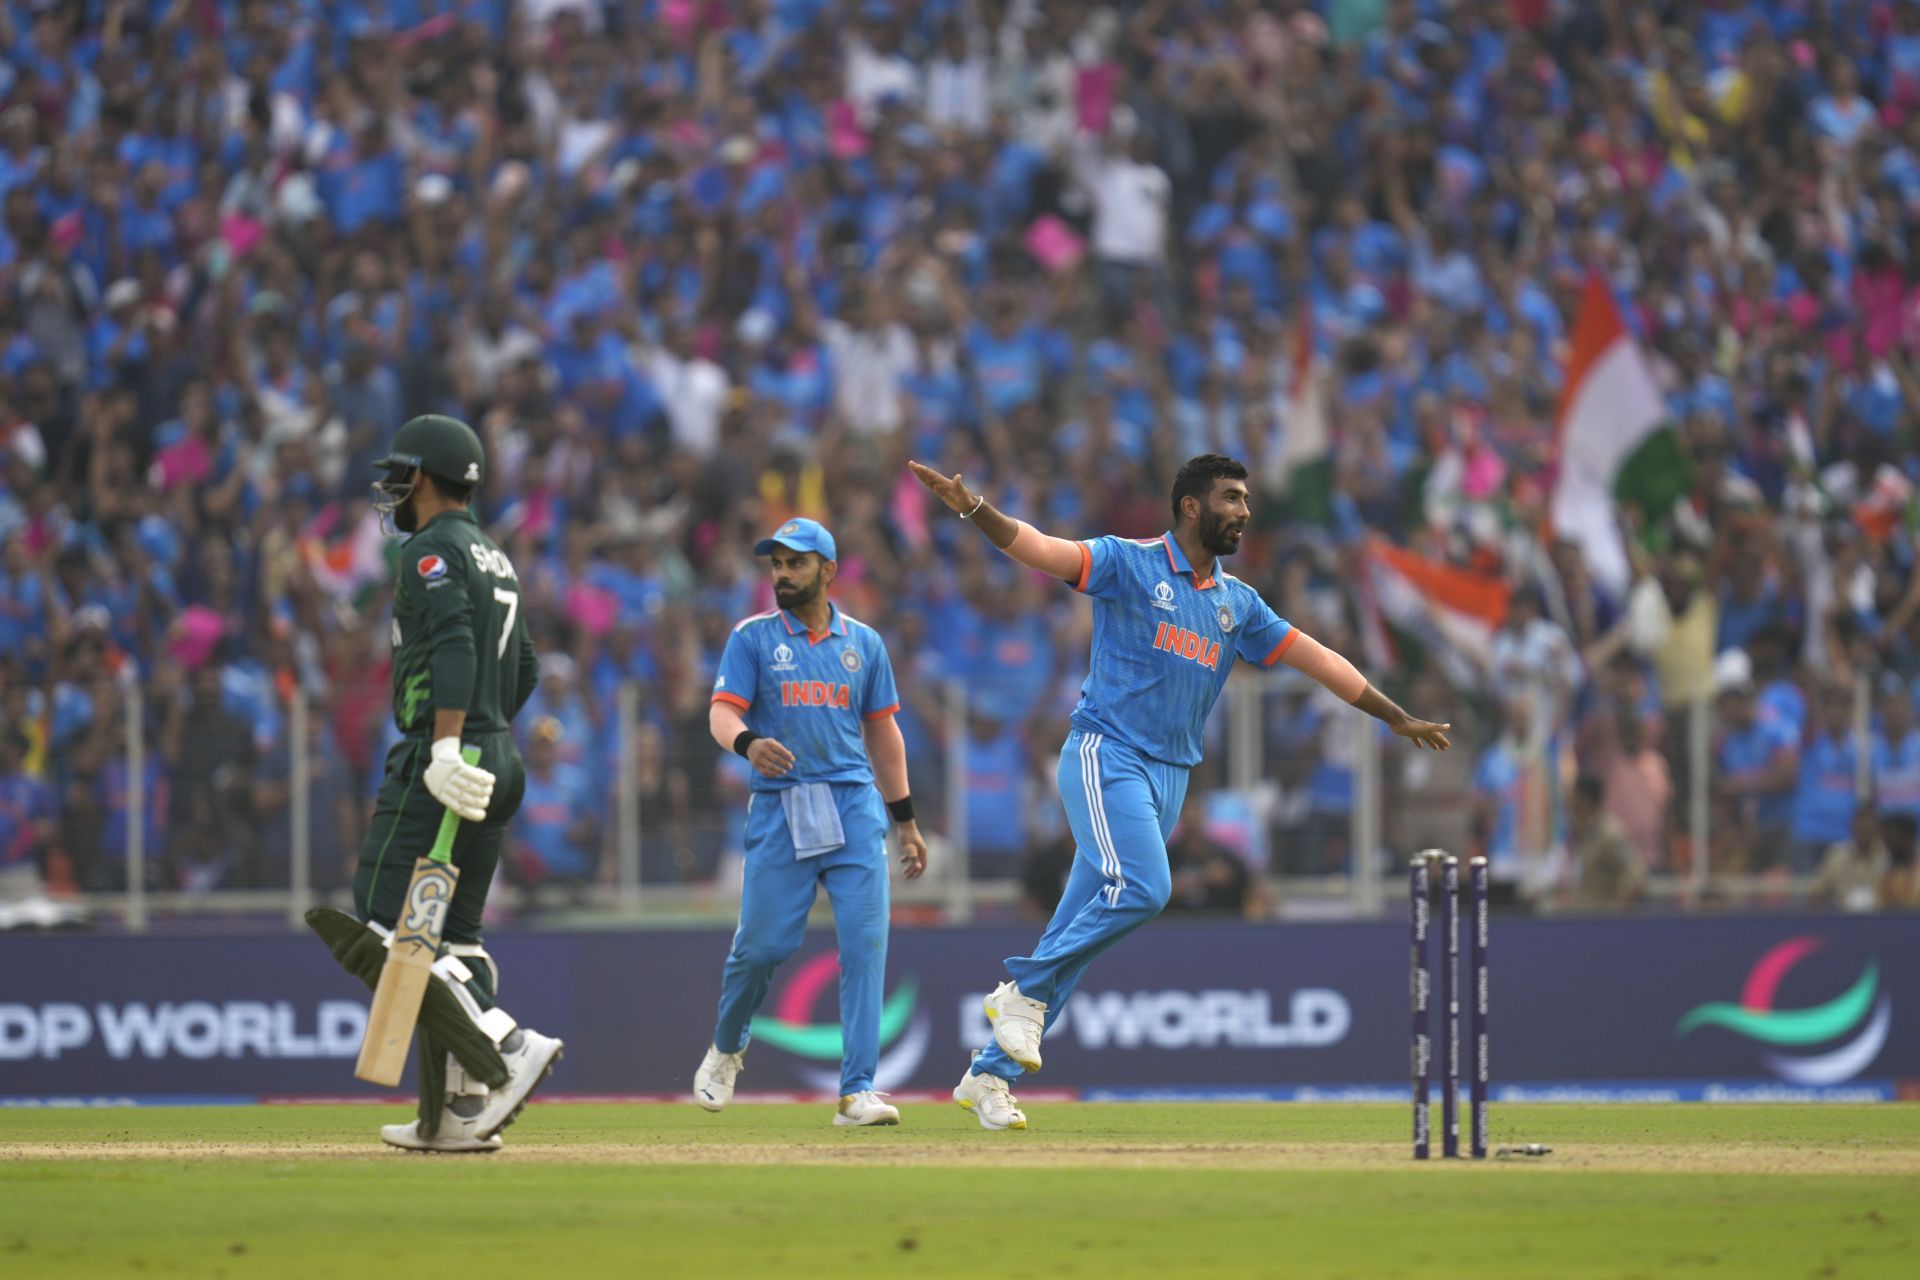 The India-Pakistan game was played in front of a vociferously supporting home crowd. [P/C: AP]